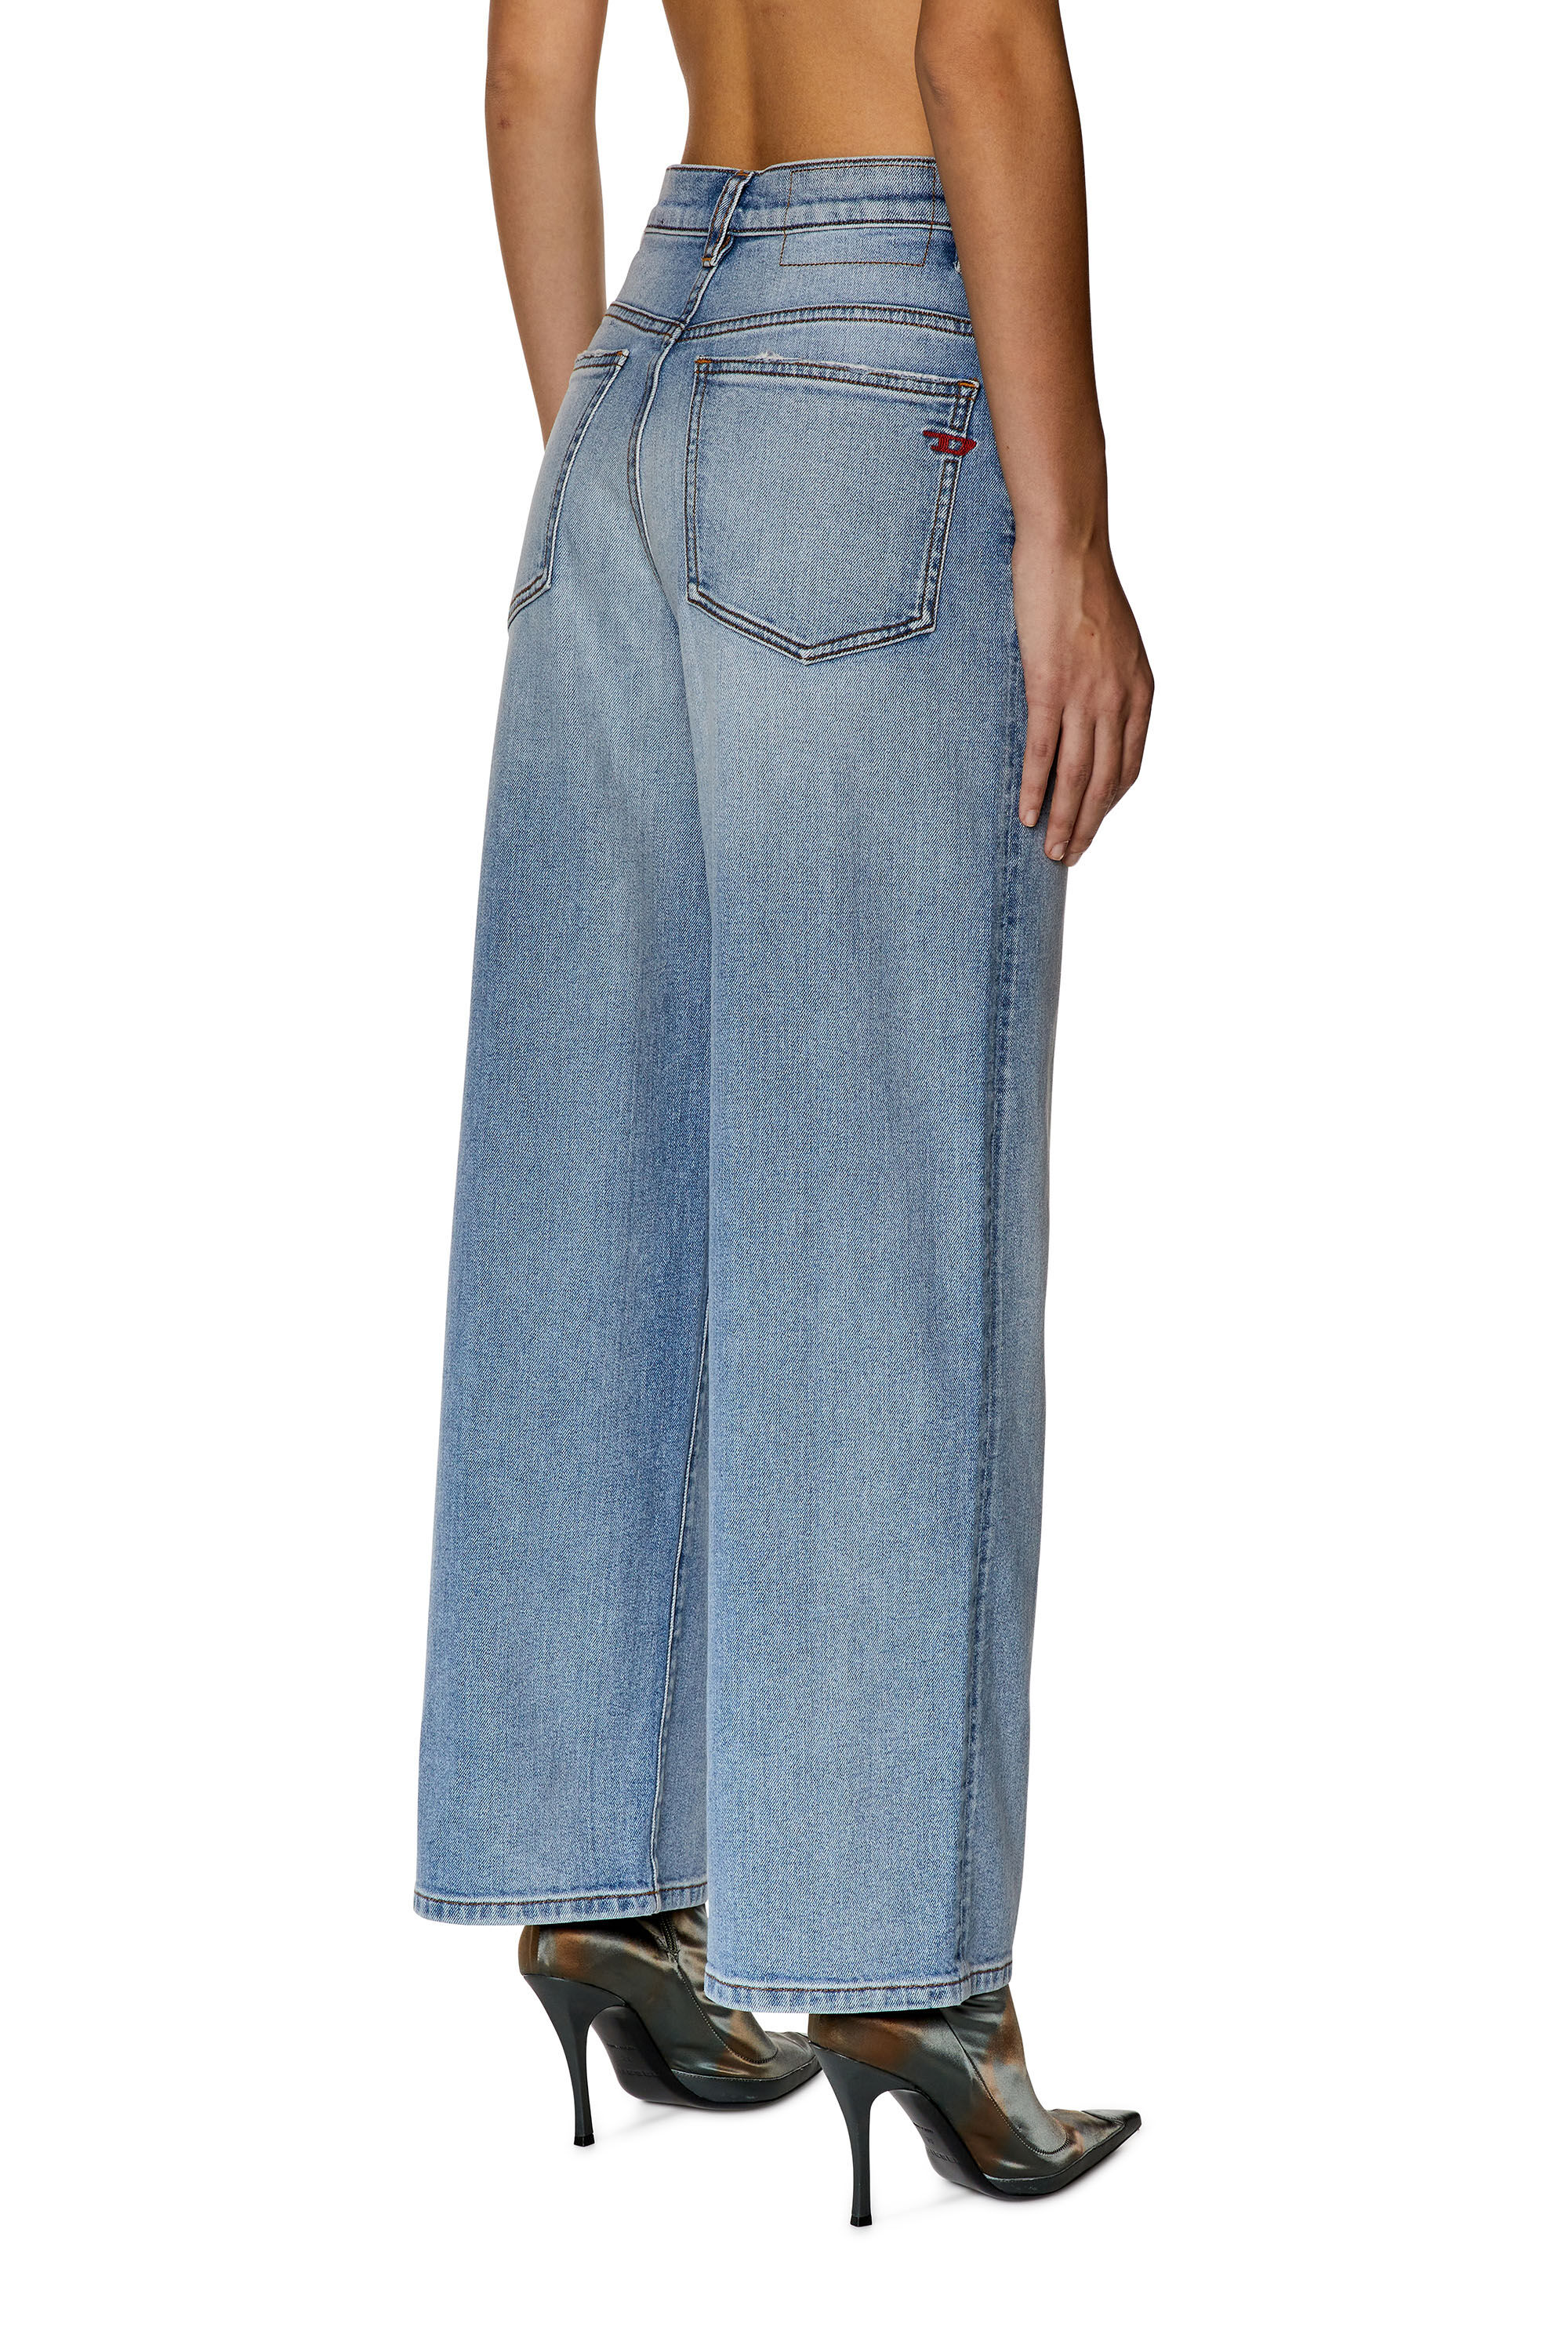 Women's Bootcut and Flare Jeans, Light blue